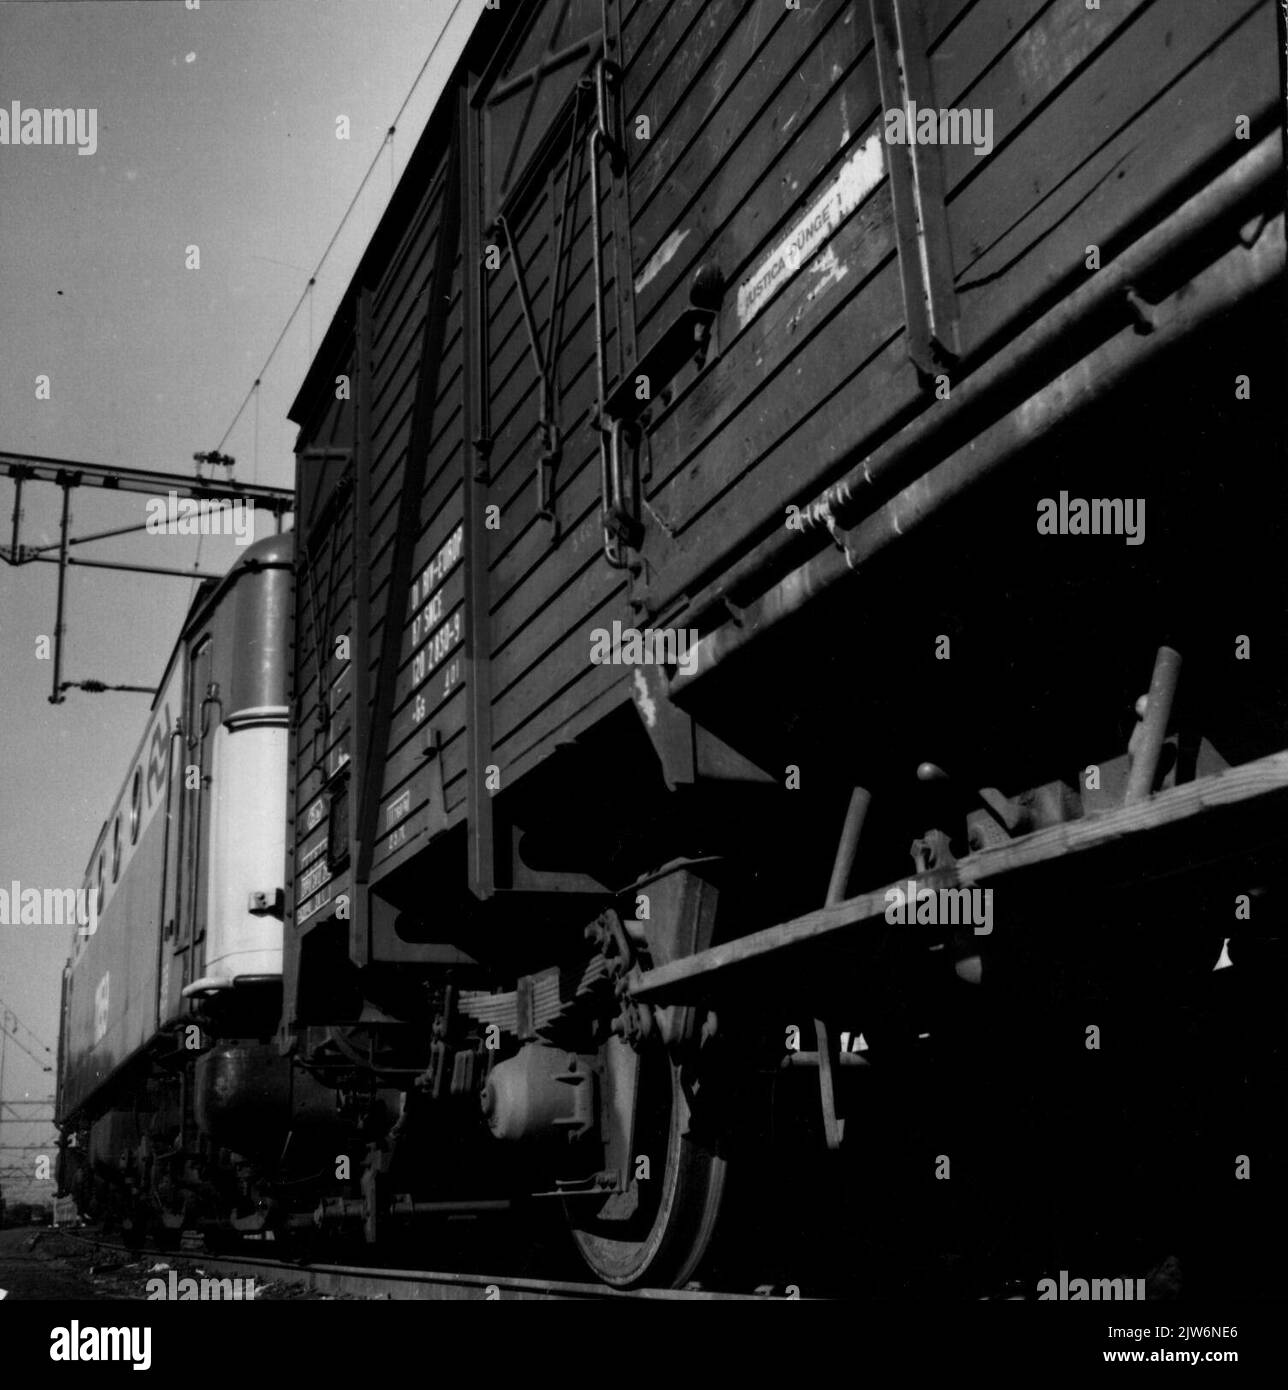 Image of the electric locomotive No. 1159 (series 1100) of the N.S ...